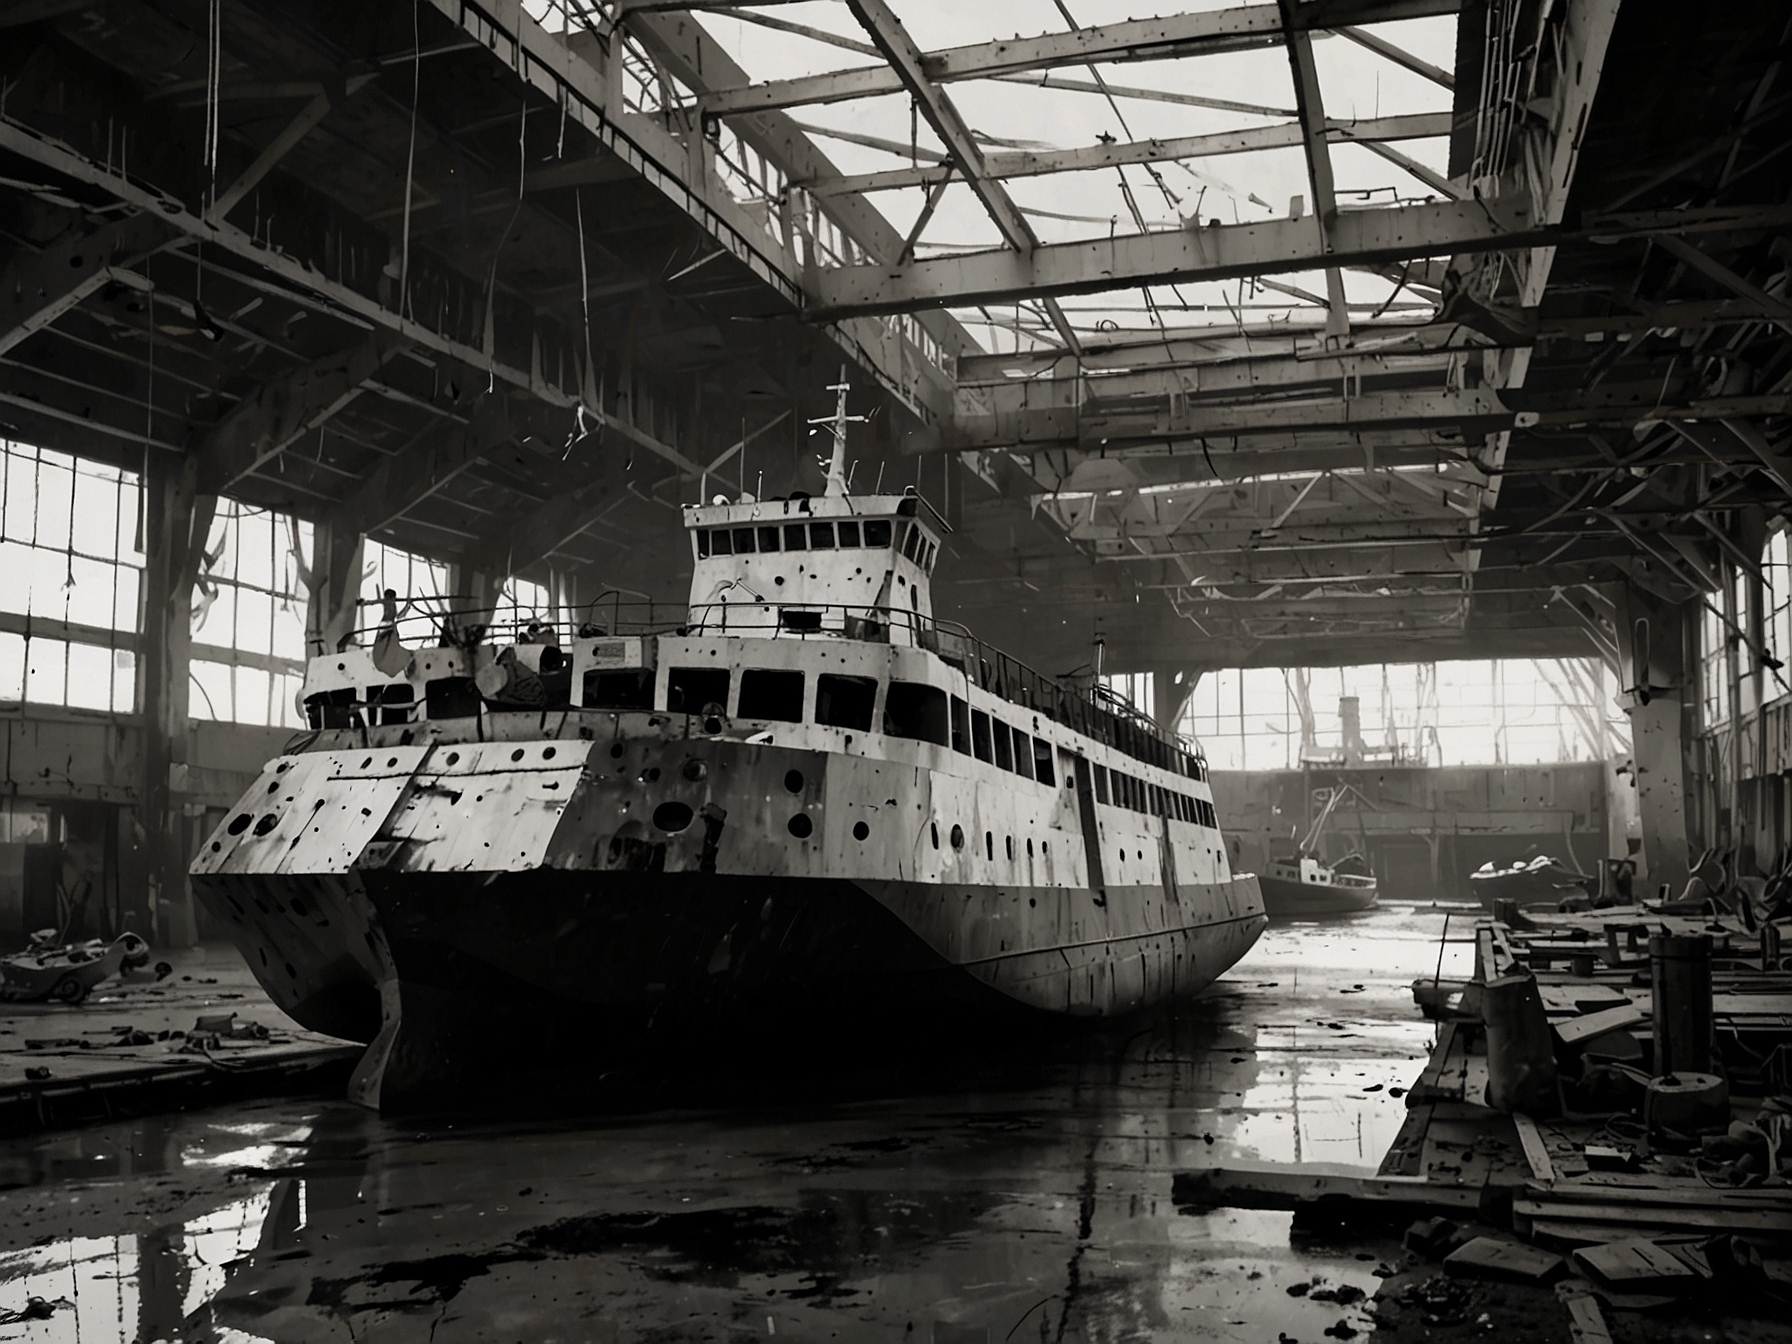 Image showing a dilapidated, incomplete ferry in a Scottish shipyard, symbolizing the ongoing ferries fiasco and the contemporary issues in Scotland's maritime infrastructure.